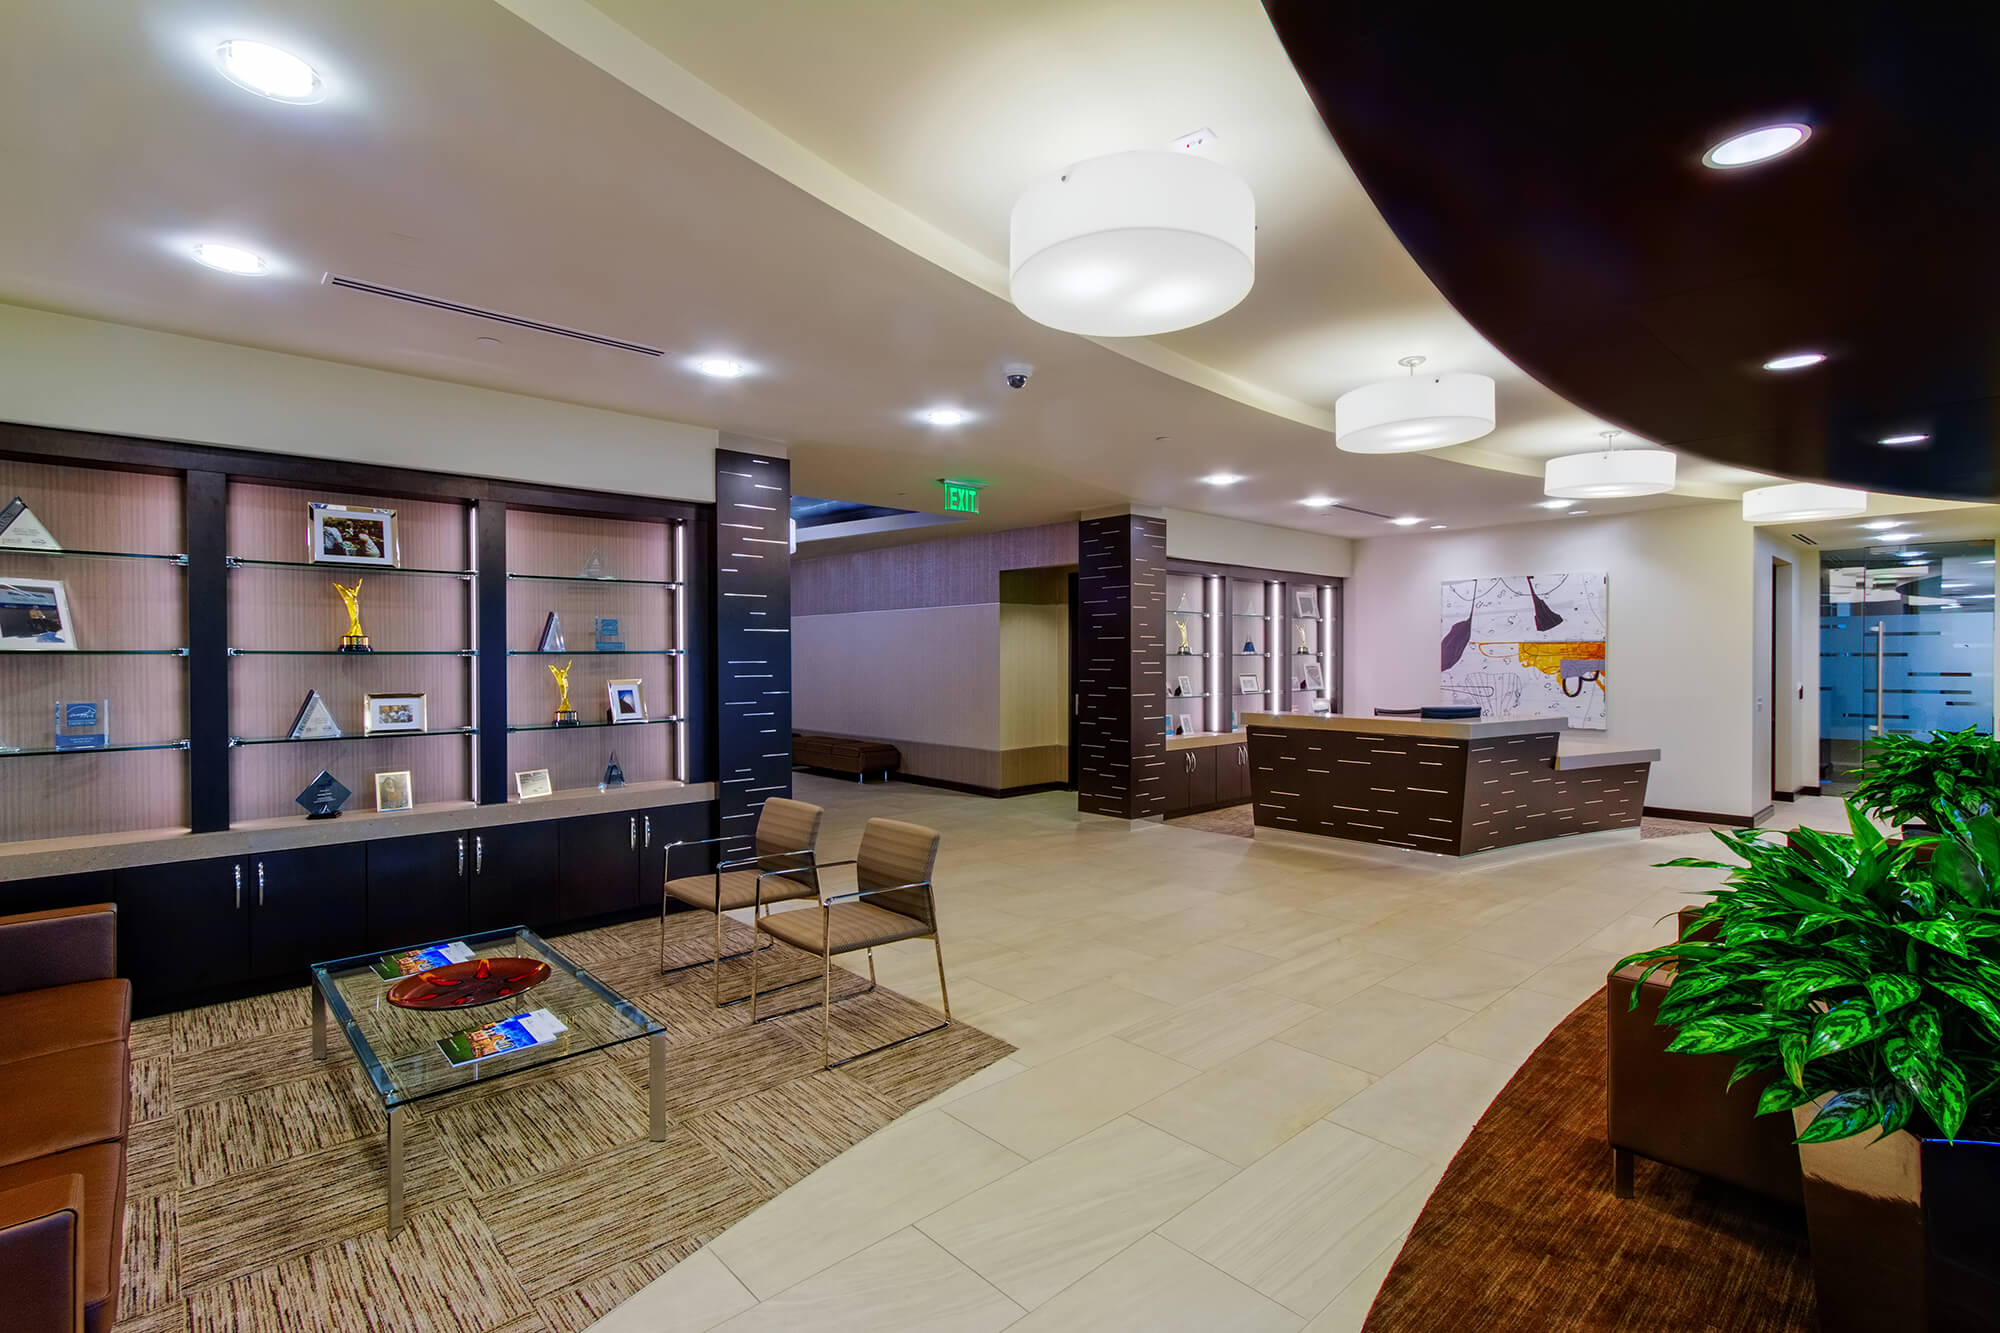 #Flashbackfriday to our work on Meritage Homes Corporate Headquarters in Scottsdale, Arizona! This 55,000S SF Class A office T.I. features stylish designs, a large training room, and a state-of-the-art conference room. Intense planning and coordination were required to properly sequence material deliveries and installations. Unique design elements included leather-wrapped ceilings, extensive millwork, custom framing features, and high-end lighting. See the full project at the link below! https://venncompanies.com/projects/tenant-interiors/meritage-homes/ Architect: @pinnacledesignaz . . . . . #construction #commercialrealestate #constructionmarketing #constructionequipment #commercialrealestate #constructionmanagement #constructionsite #contractor #contractorlife #contractors #contractorsofinsta #generalcontractor #generalcontractors #constructionphotos #realestate #constructionphotography #constructionlife #arizona #GC #Scottsdale #tenantinterior #meritagehomes #realestate